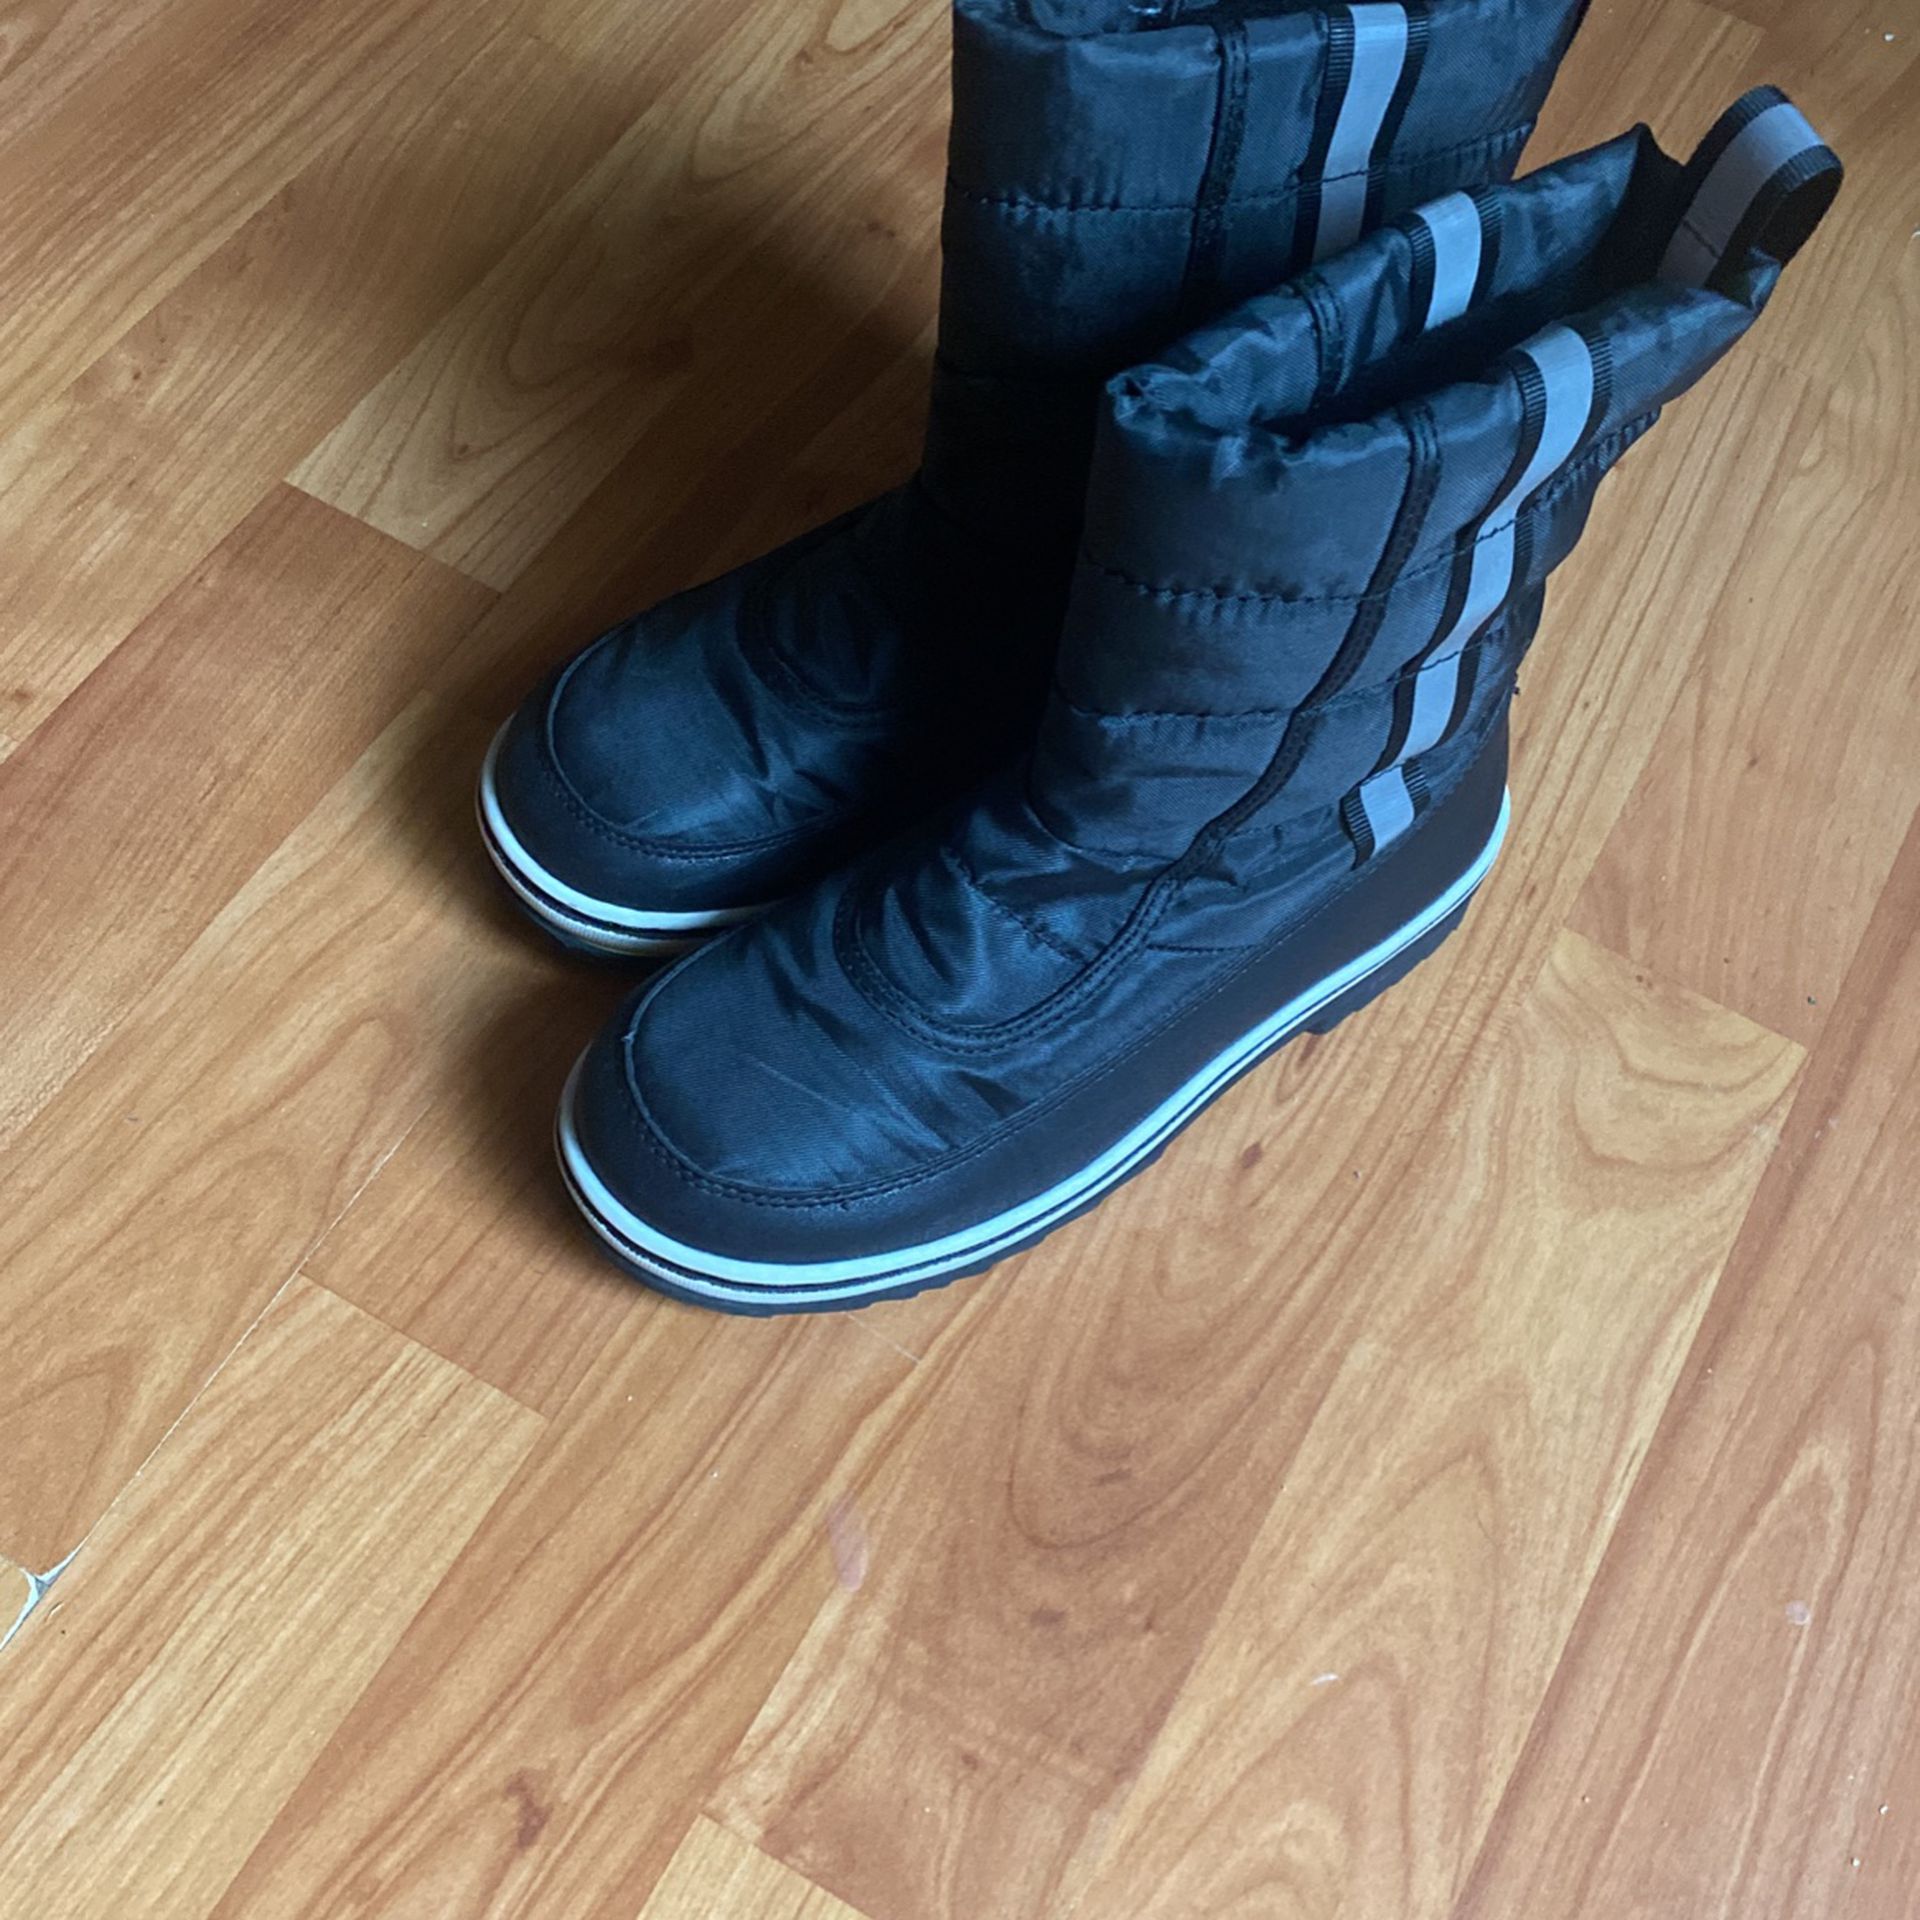 Girl Justice Boots Size 2